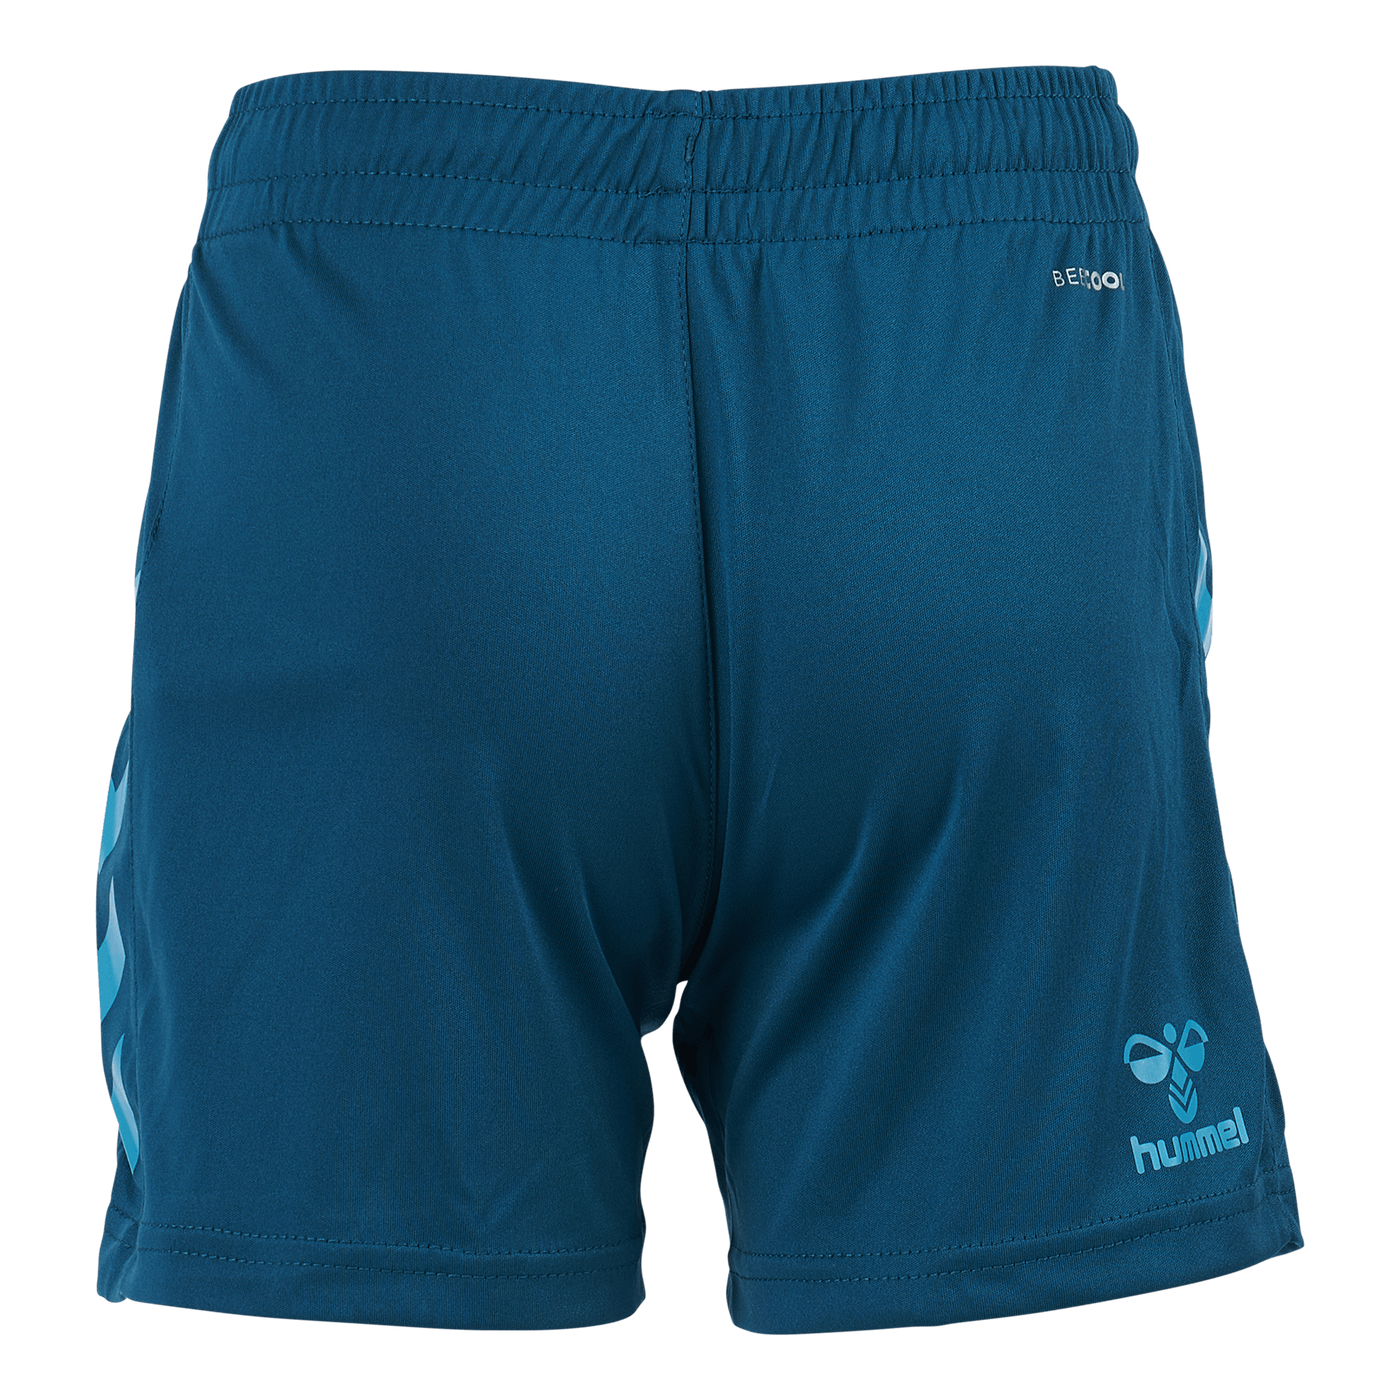 Hmlcore Xk Poly Shorts Blue Coral